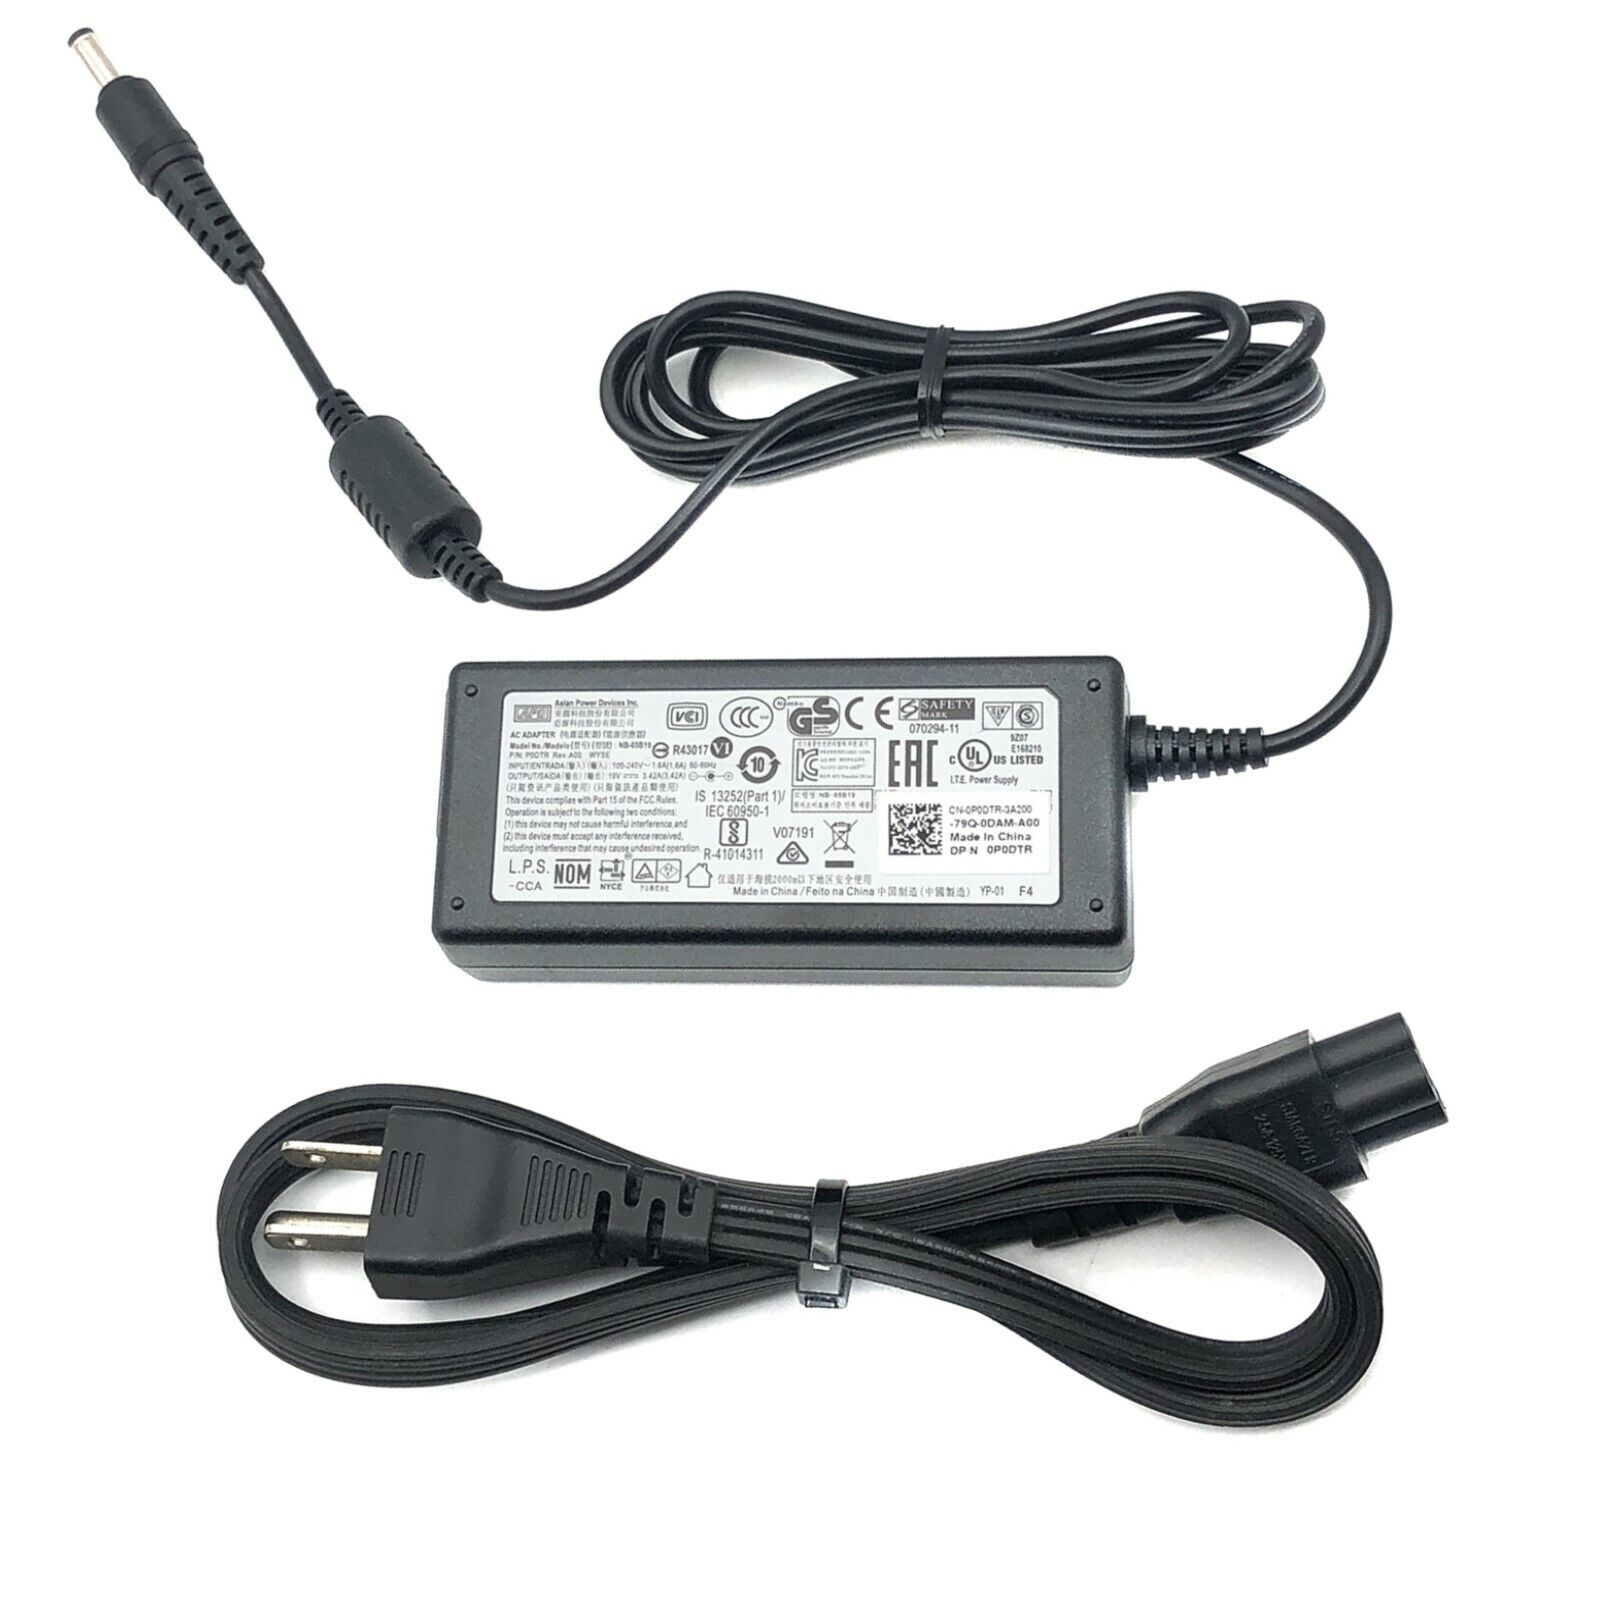 NEW Genuine Asus UL50 UL50V UL80 UL80A AC Power Adapter Charger 19V 65W